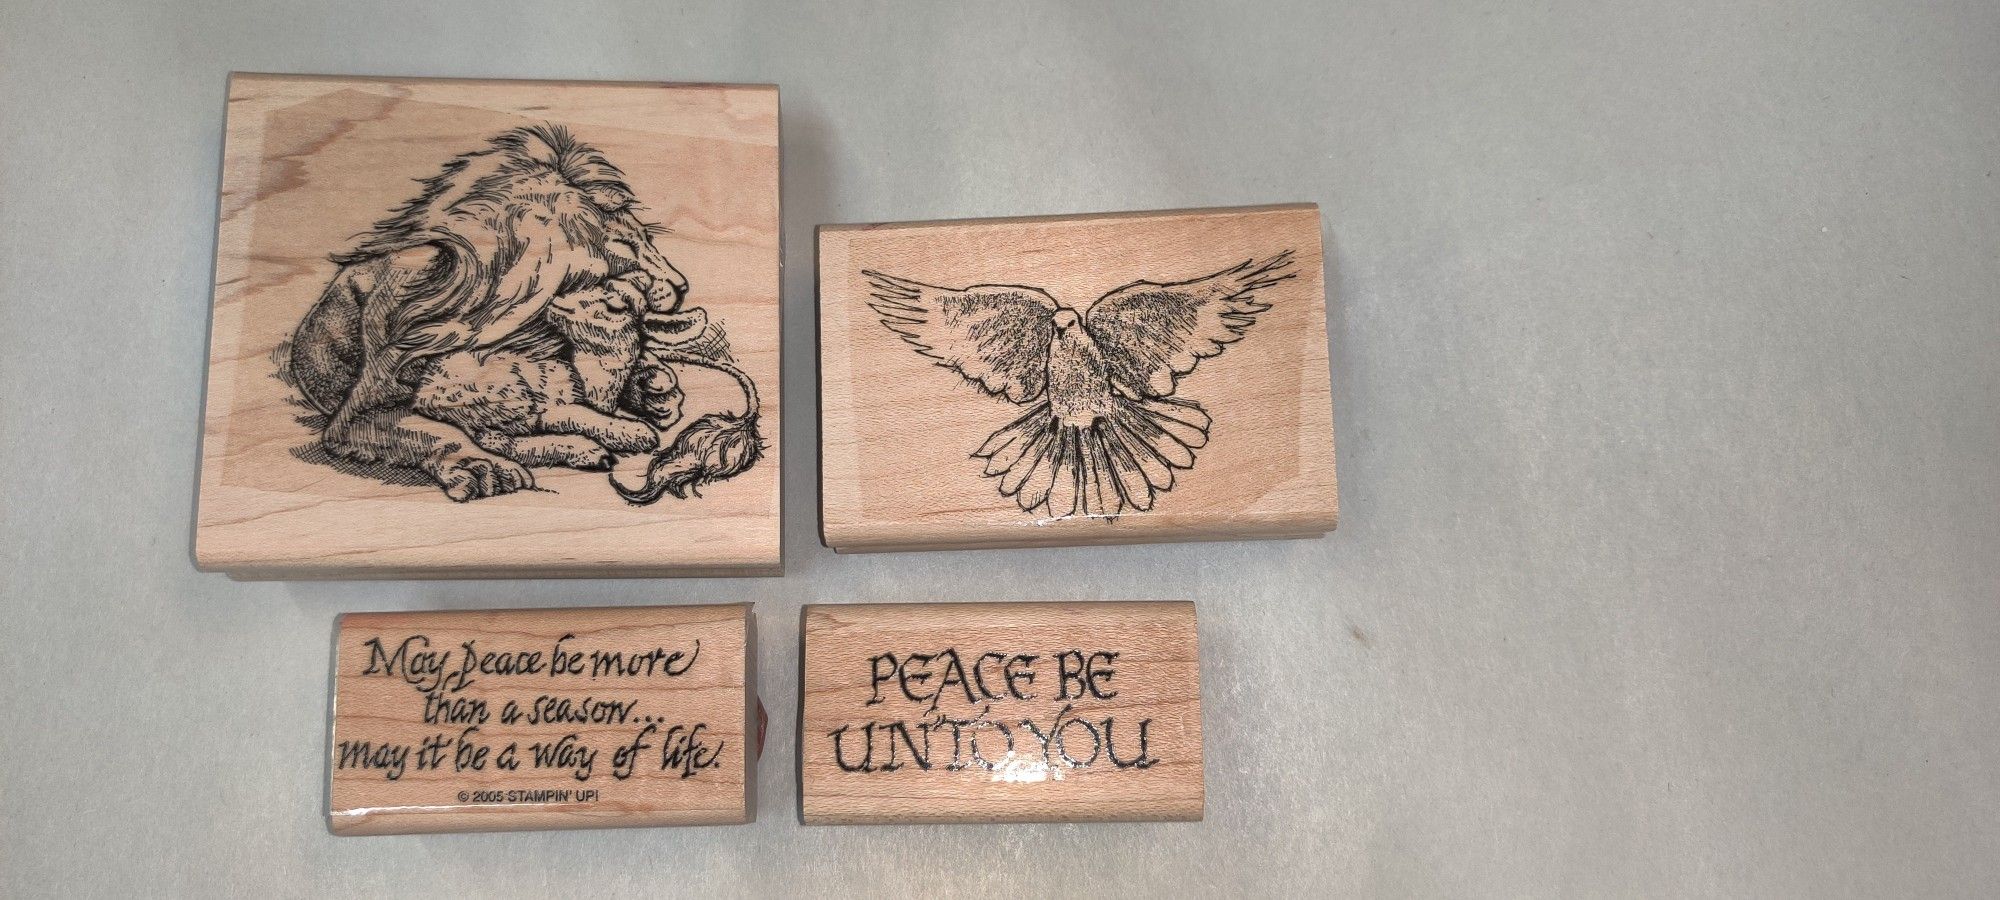 Stampin' Up Stamps Each